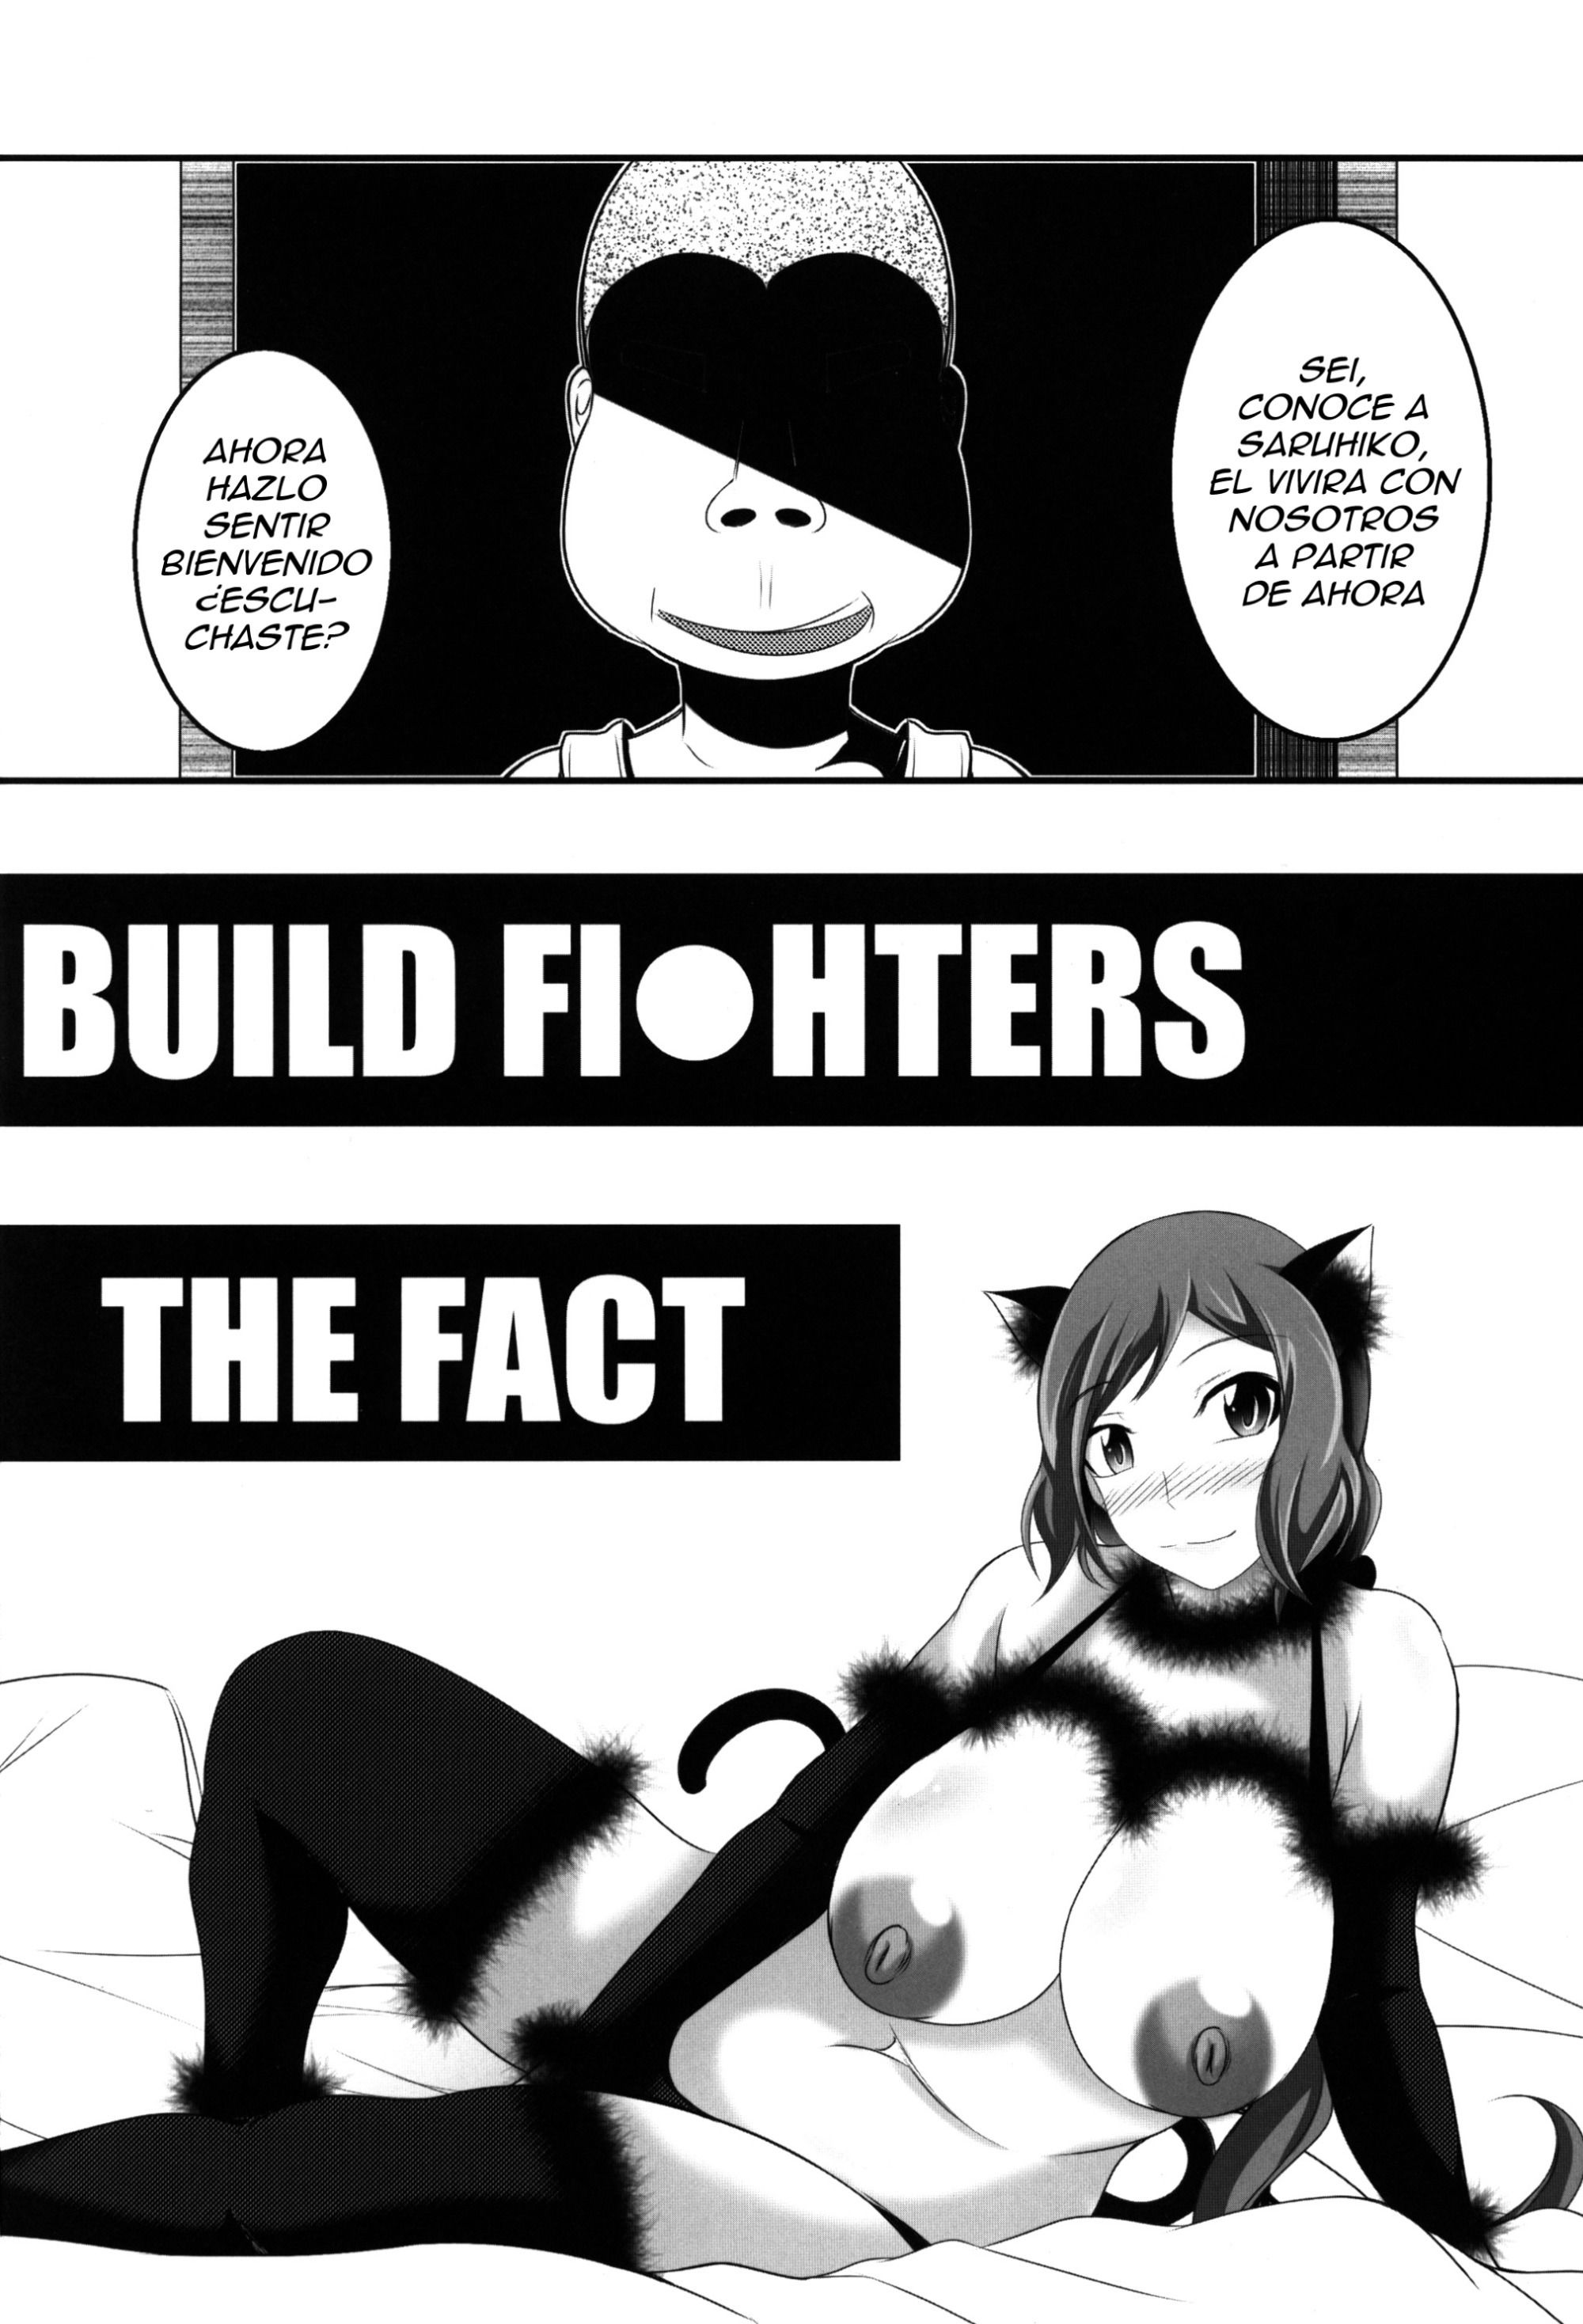 Build Fighters The Fact - 2